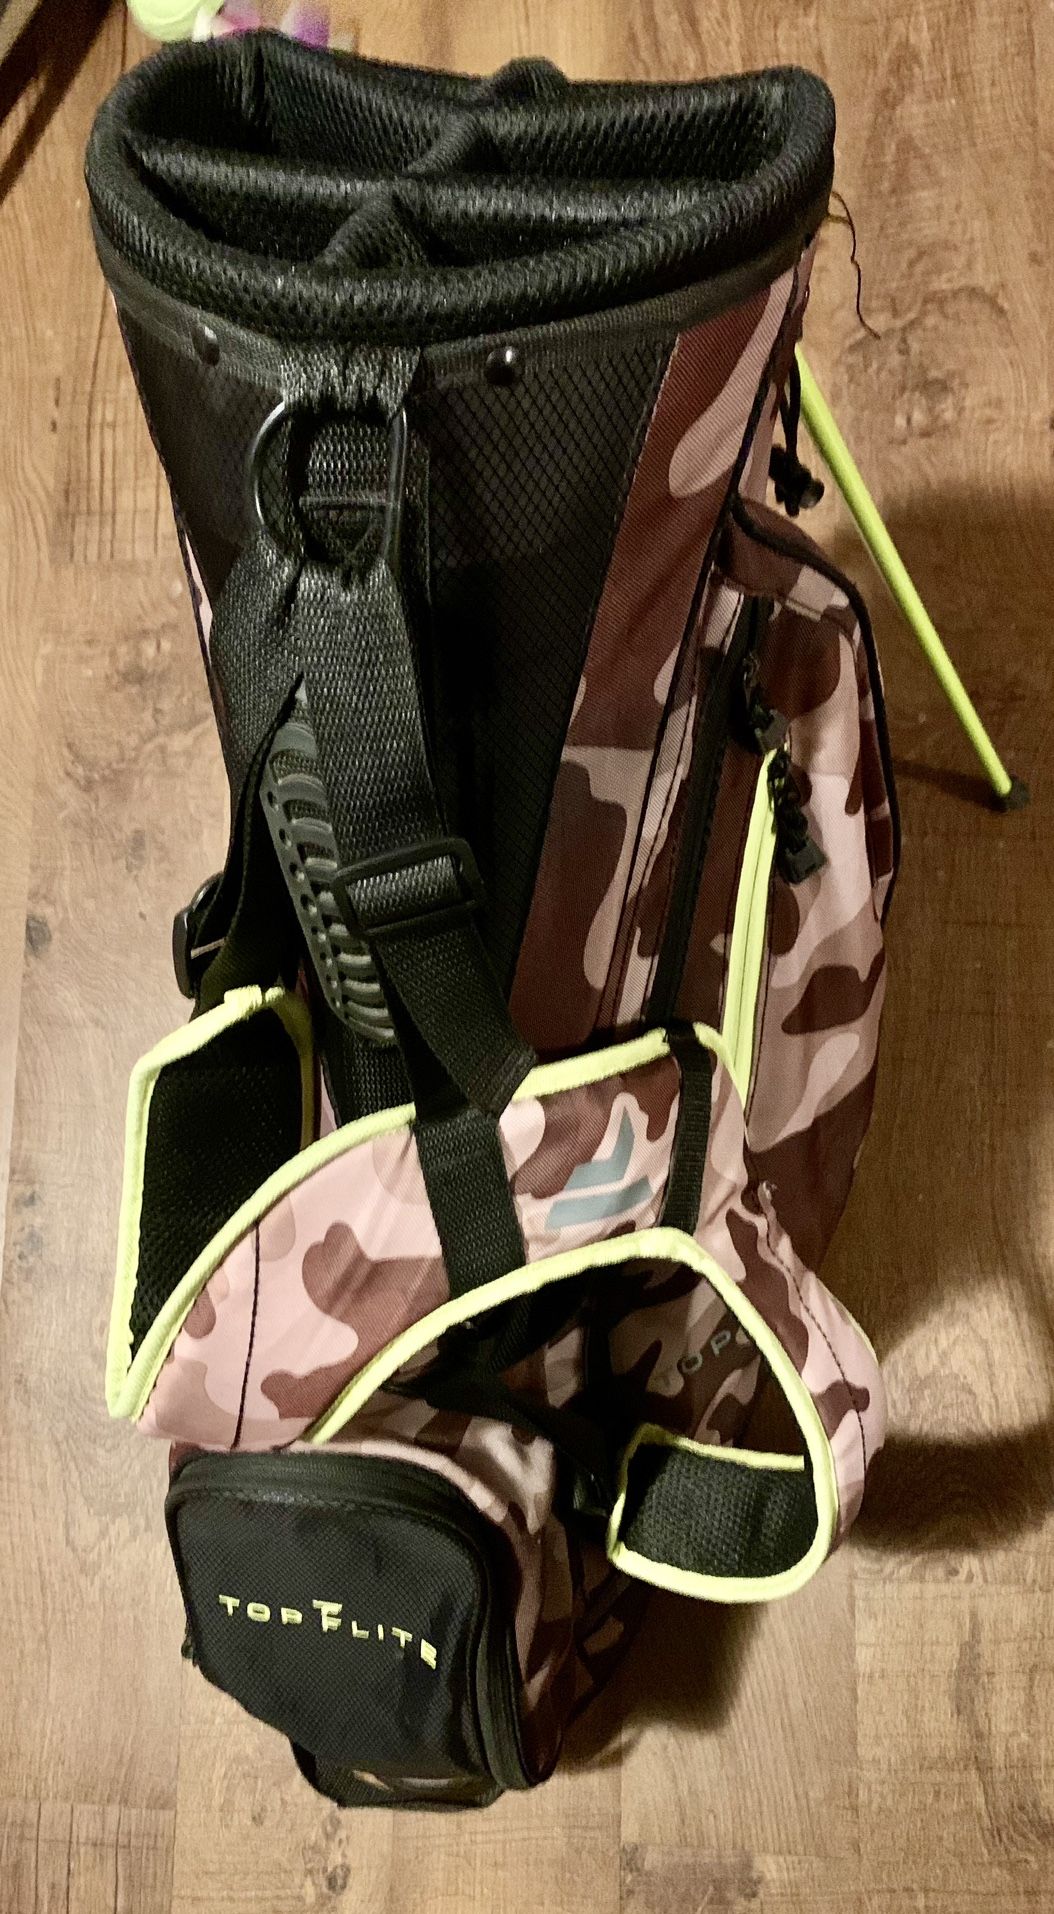 Golf Bag With clubs